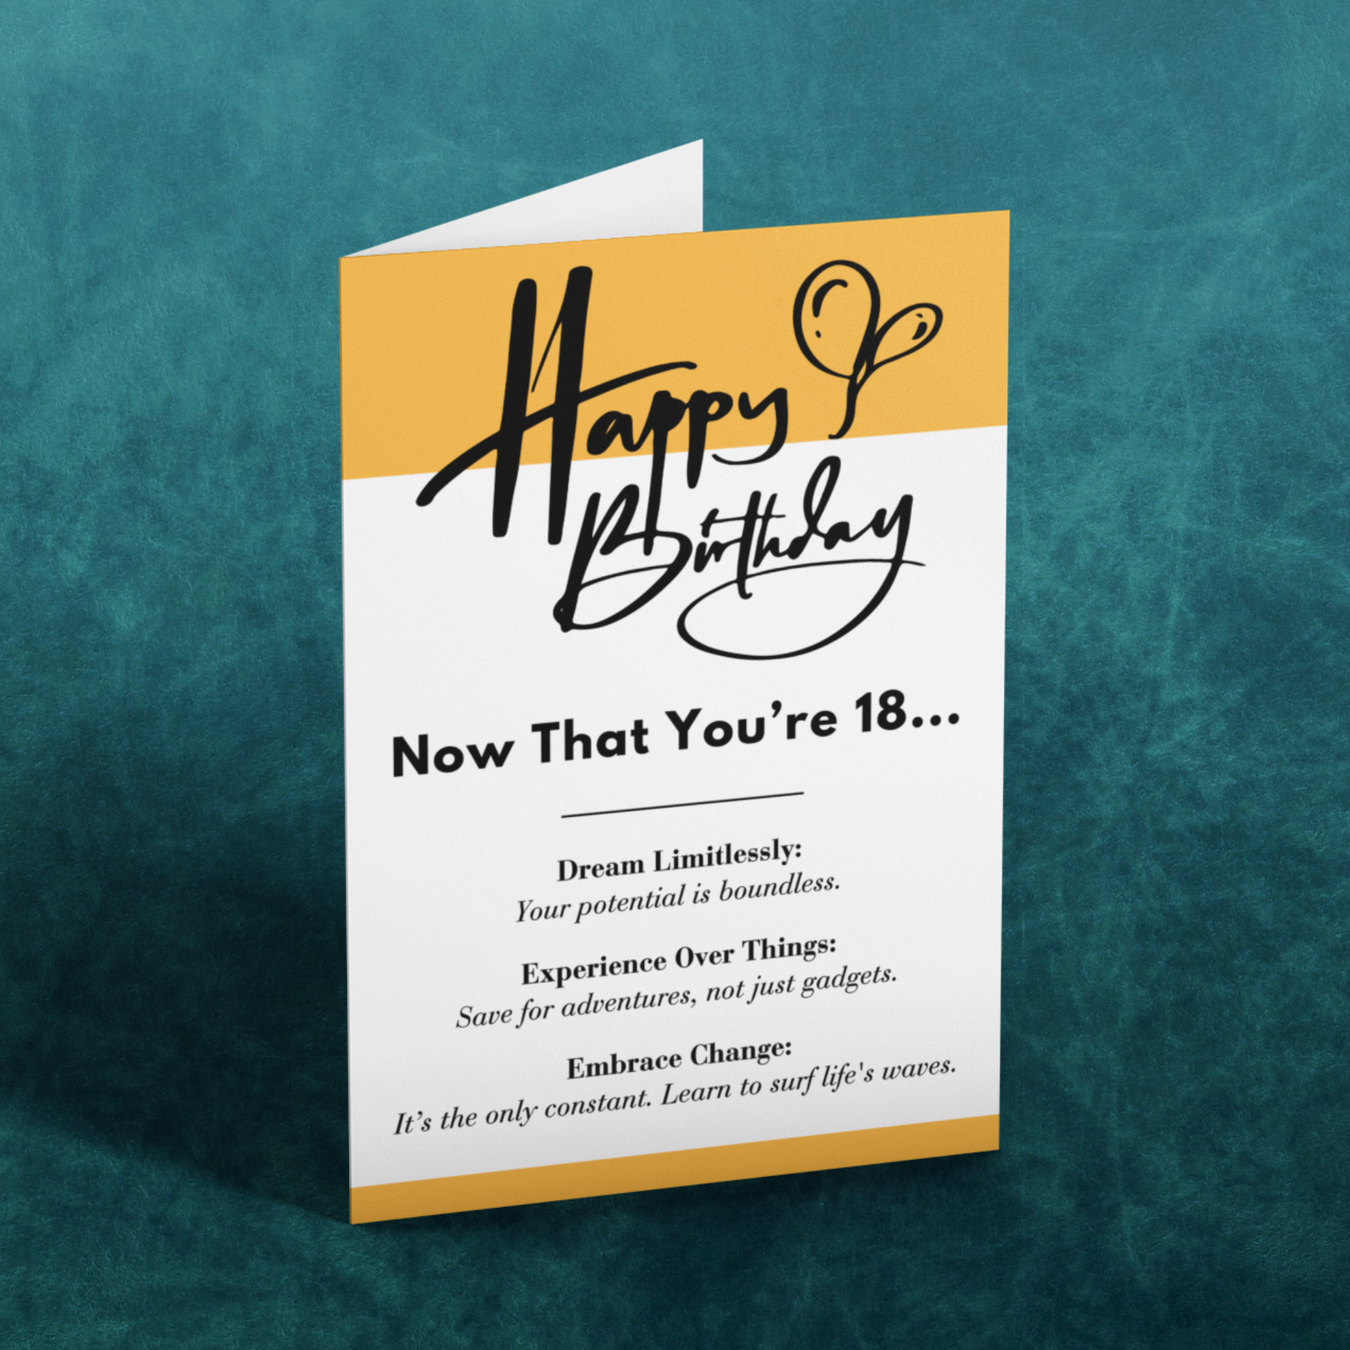 18th Birthday Cards | Instant Printable Cards for Him Her